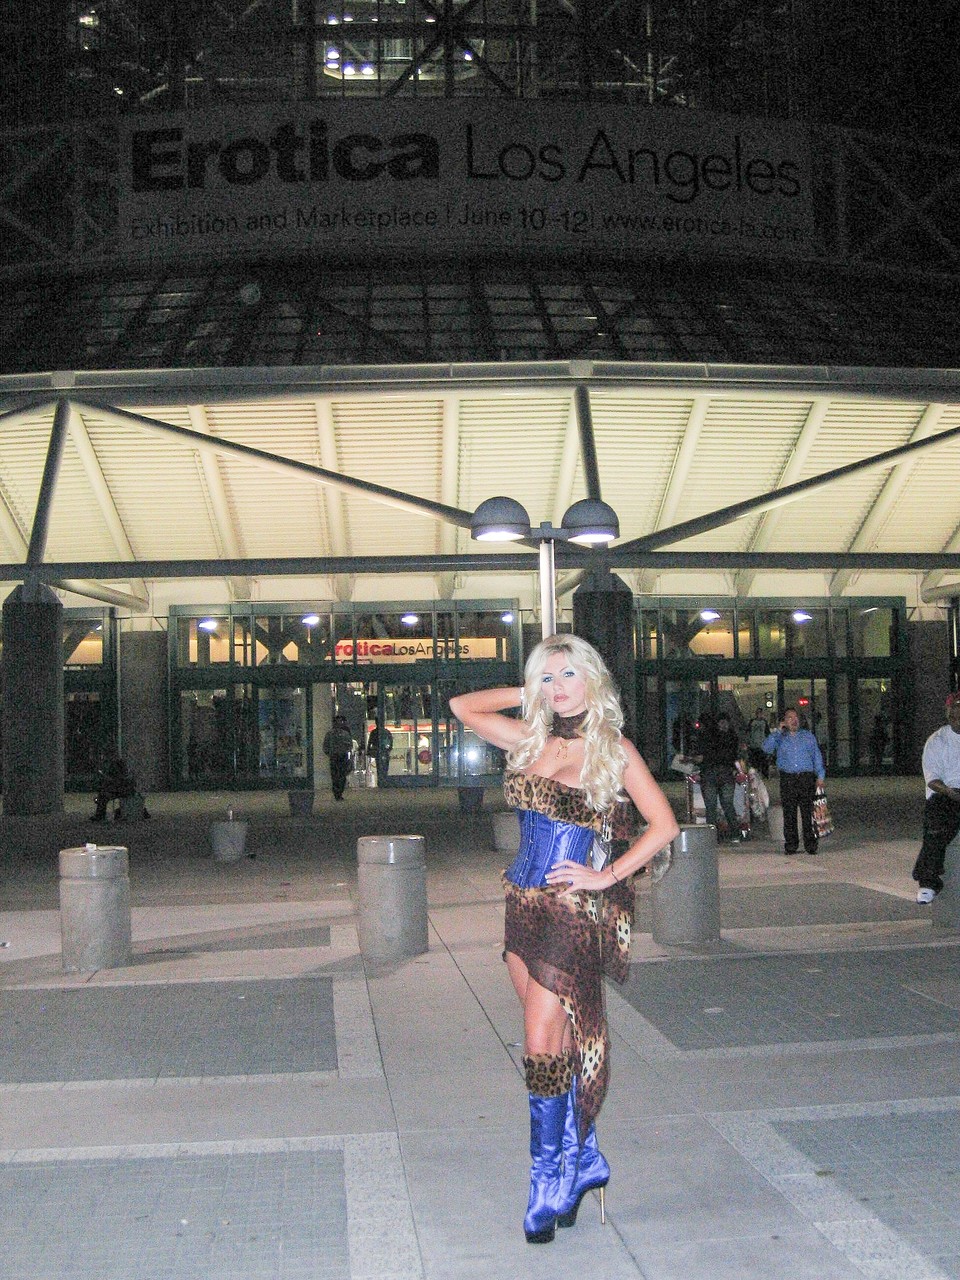 My Brittany Andrews Brittany Andrews ポルノ写真 #425347621 | My Brittany Andrews Pics, Brittany Andrews, Skirt, モバイルポルノ